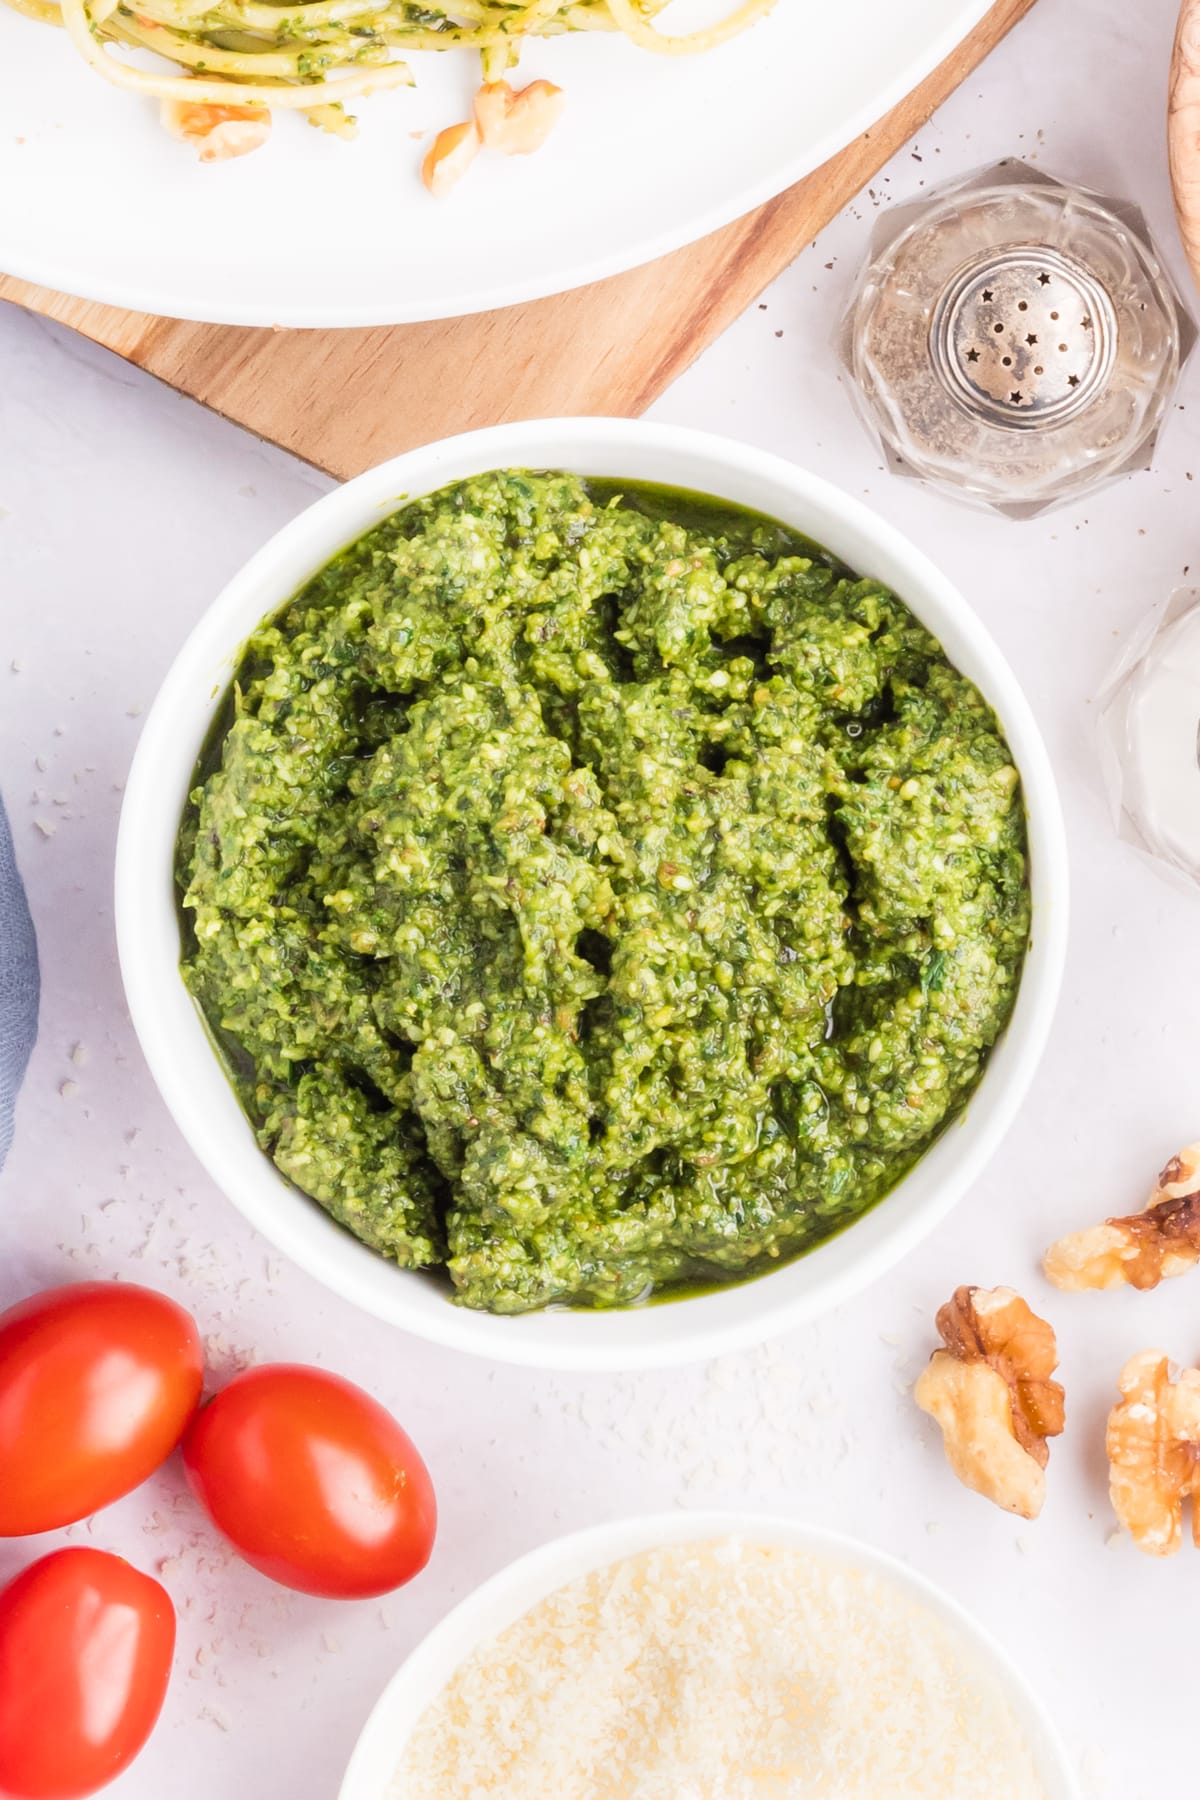 A bowl of pesto with tomatoes, basil, and other ingredients.